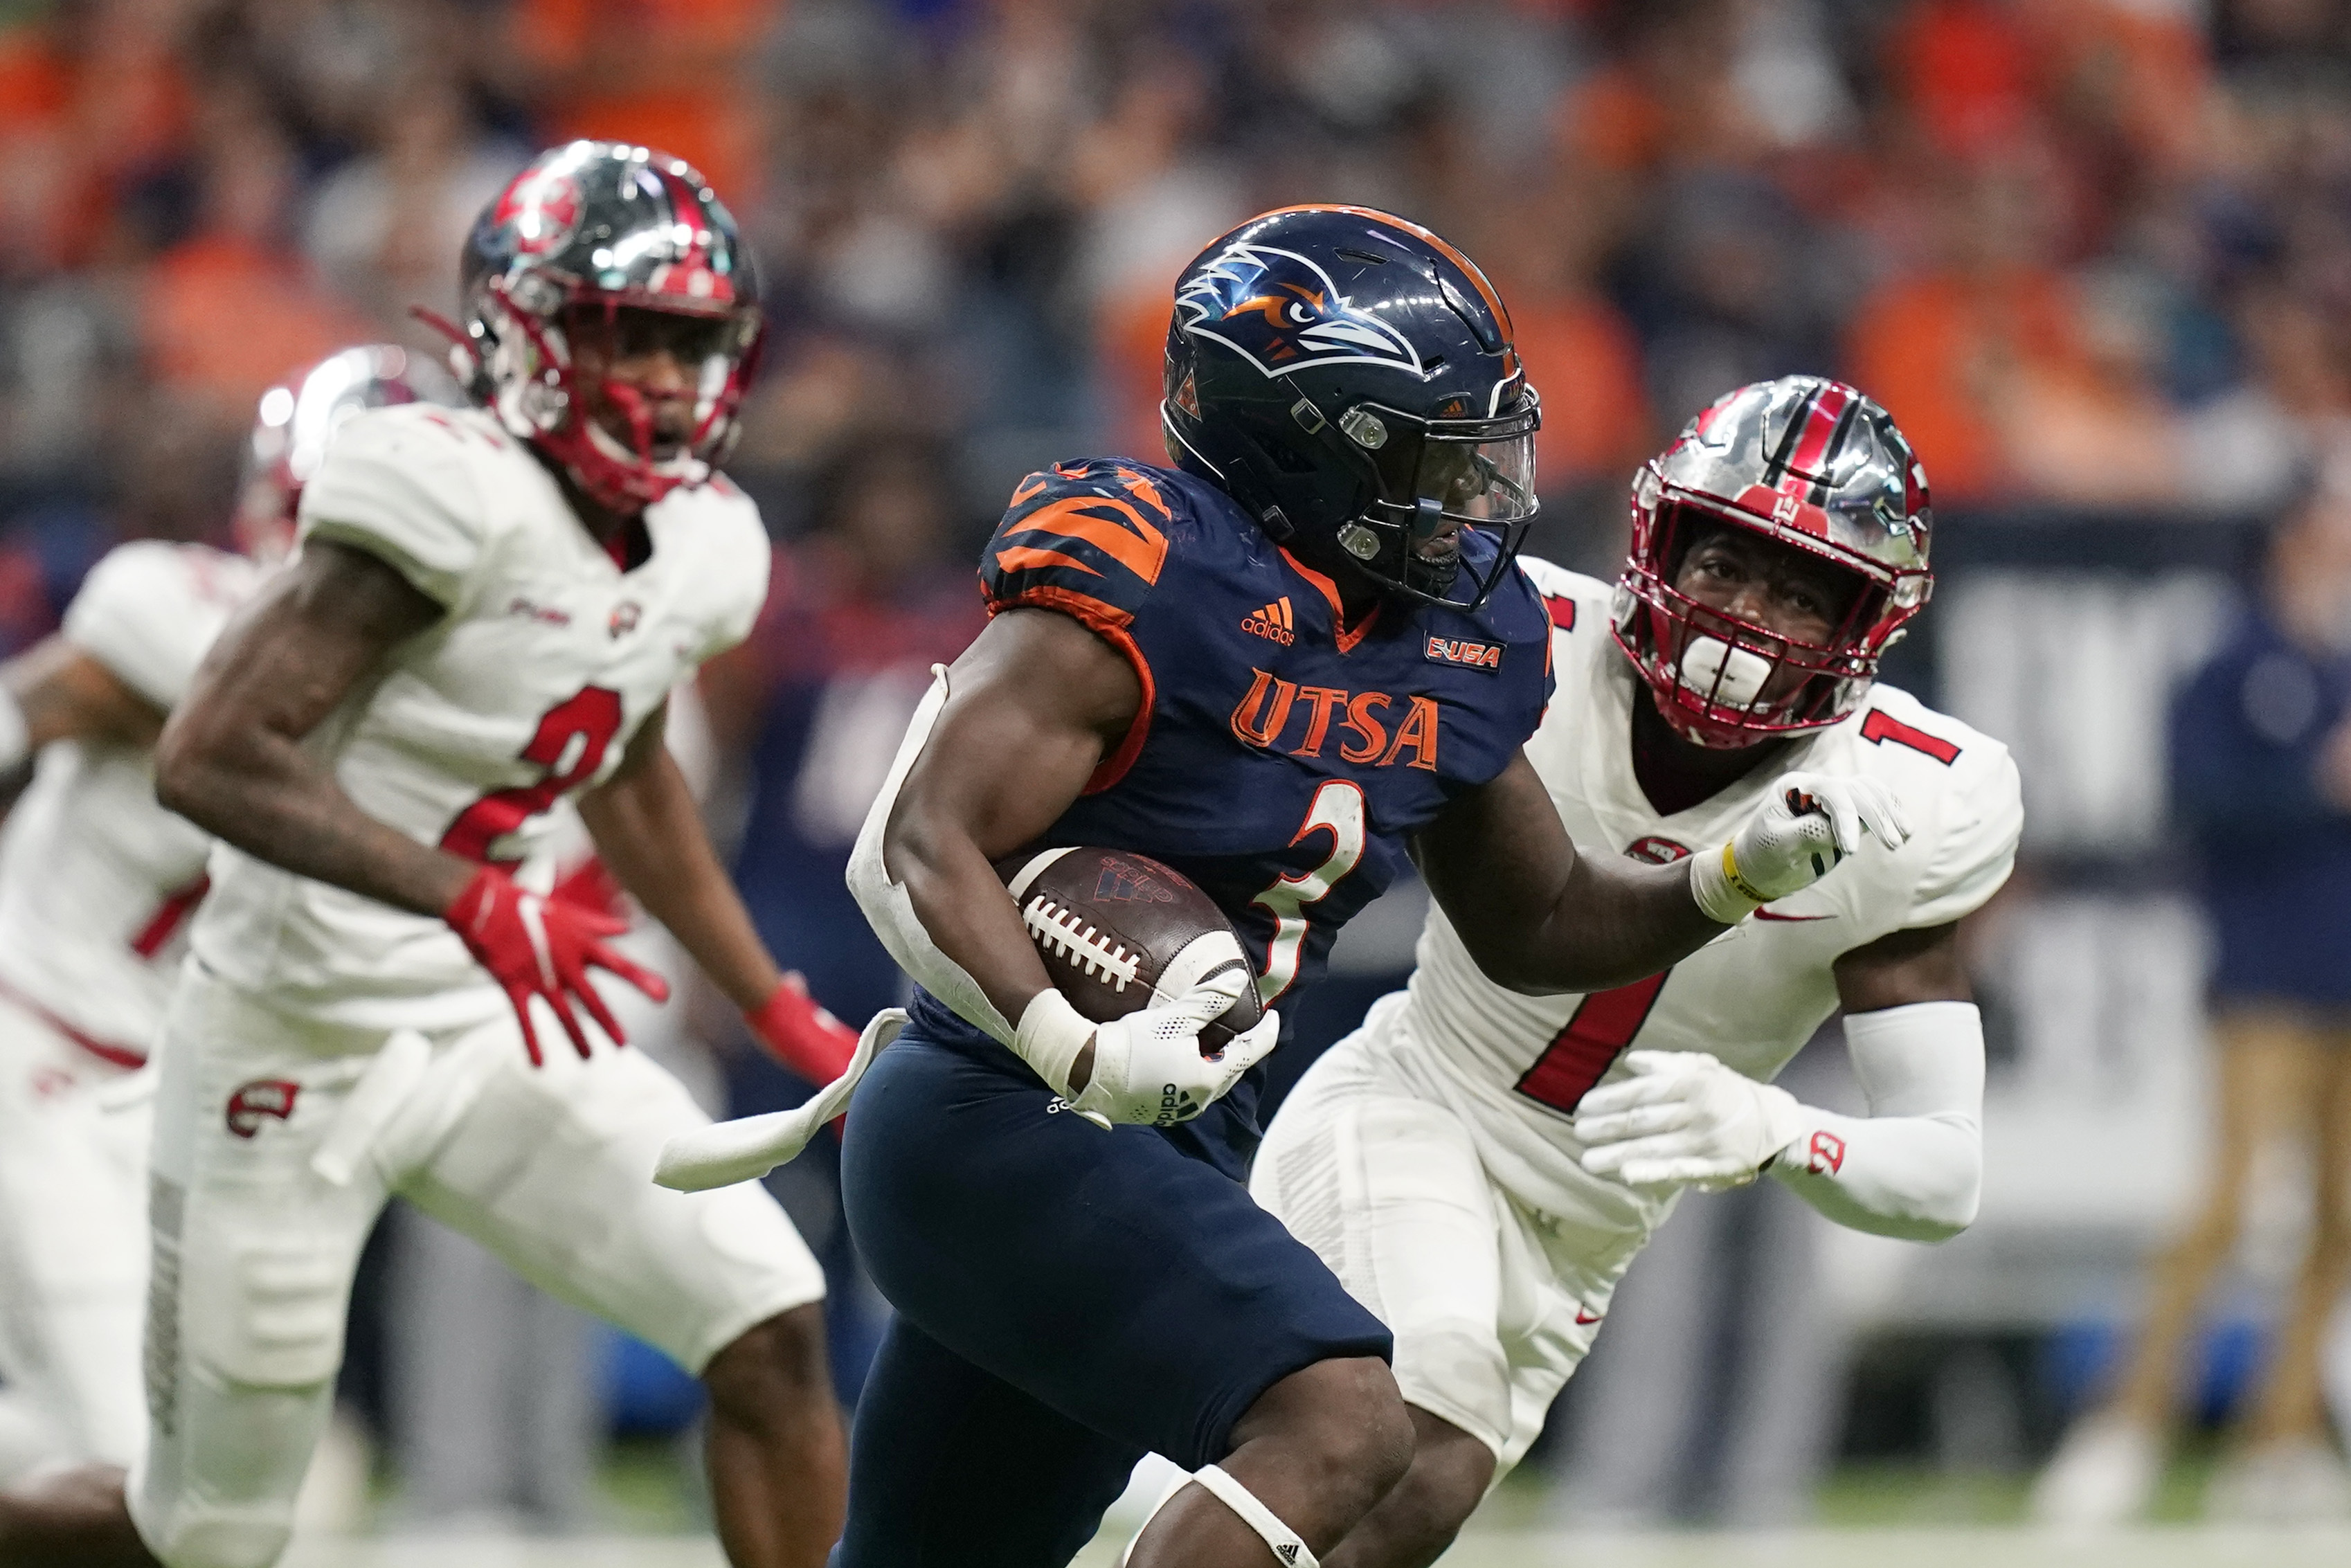 UTSA record-breaking RB Sincere McCormick to skip bowl game and declare for NFL  Draft